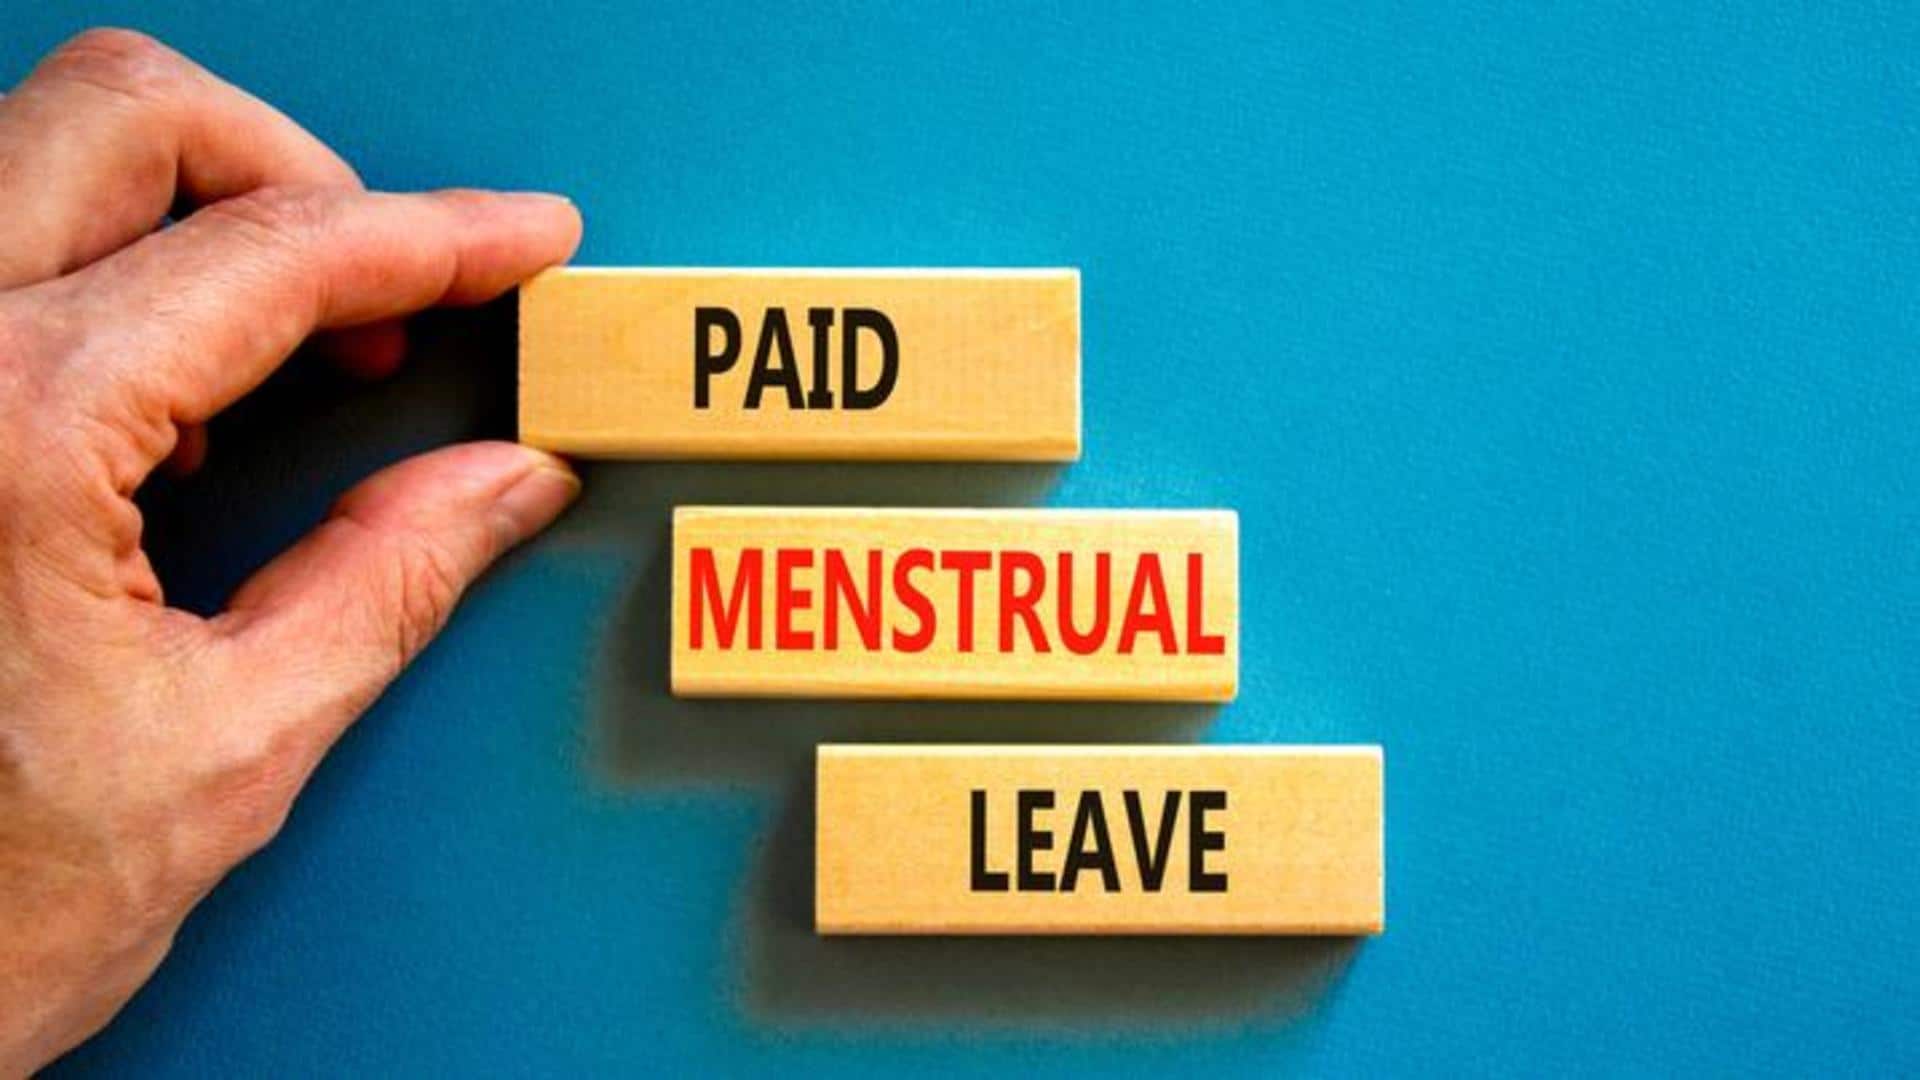 Spain becomes the first European country to approve menstrual leave